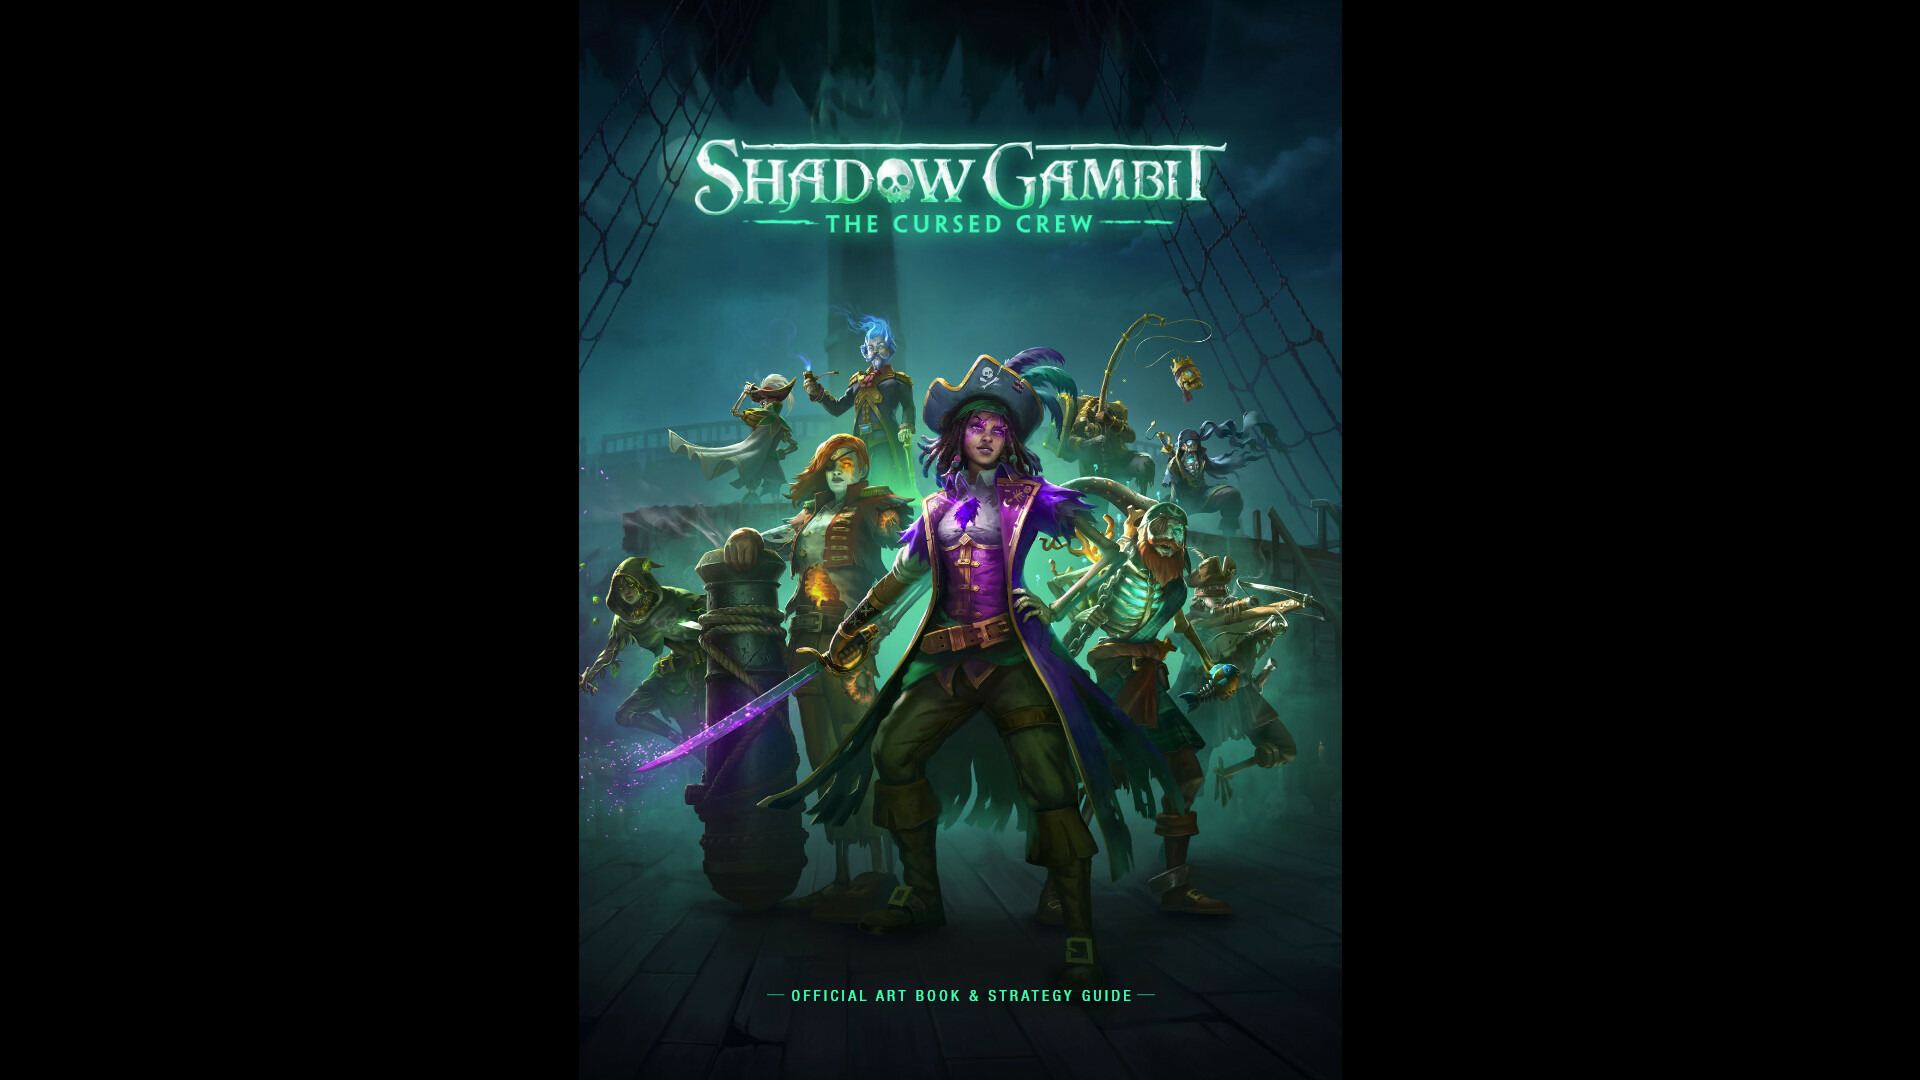 Shadow Gambit: The Cursed Crew Supporter Edition Epic Games Account $31.53